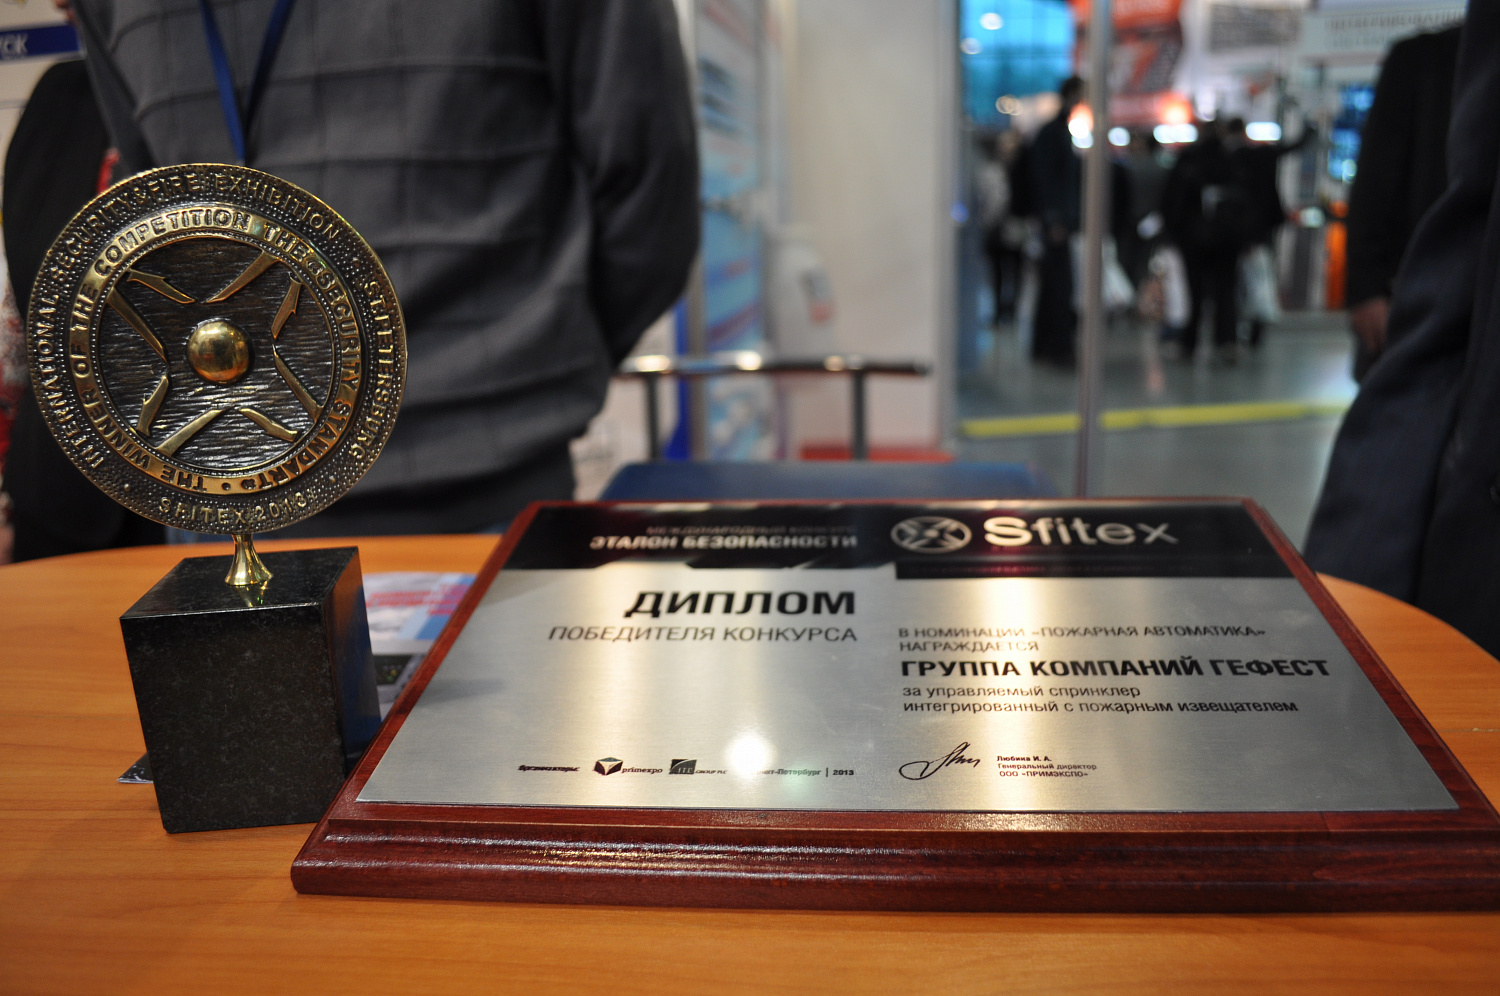 The victory in the competition "Security standard" on the exhibition SFITEX-2013